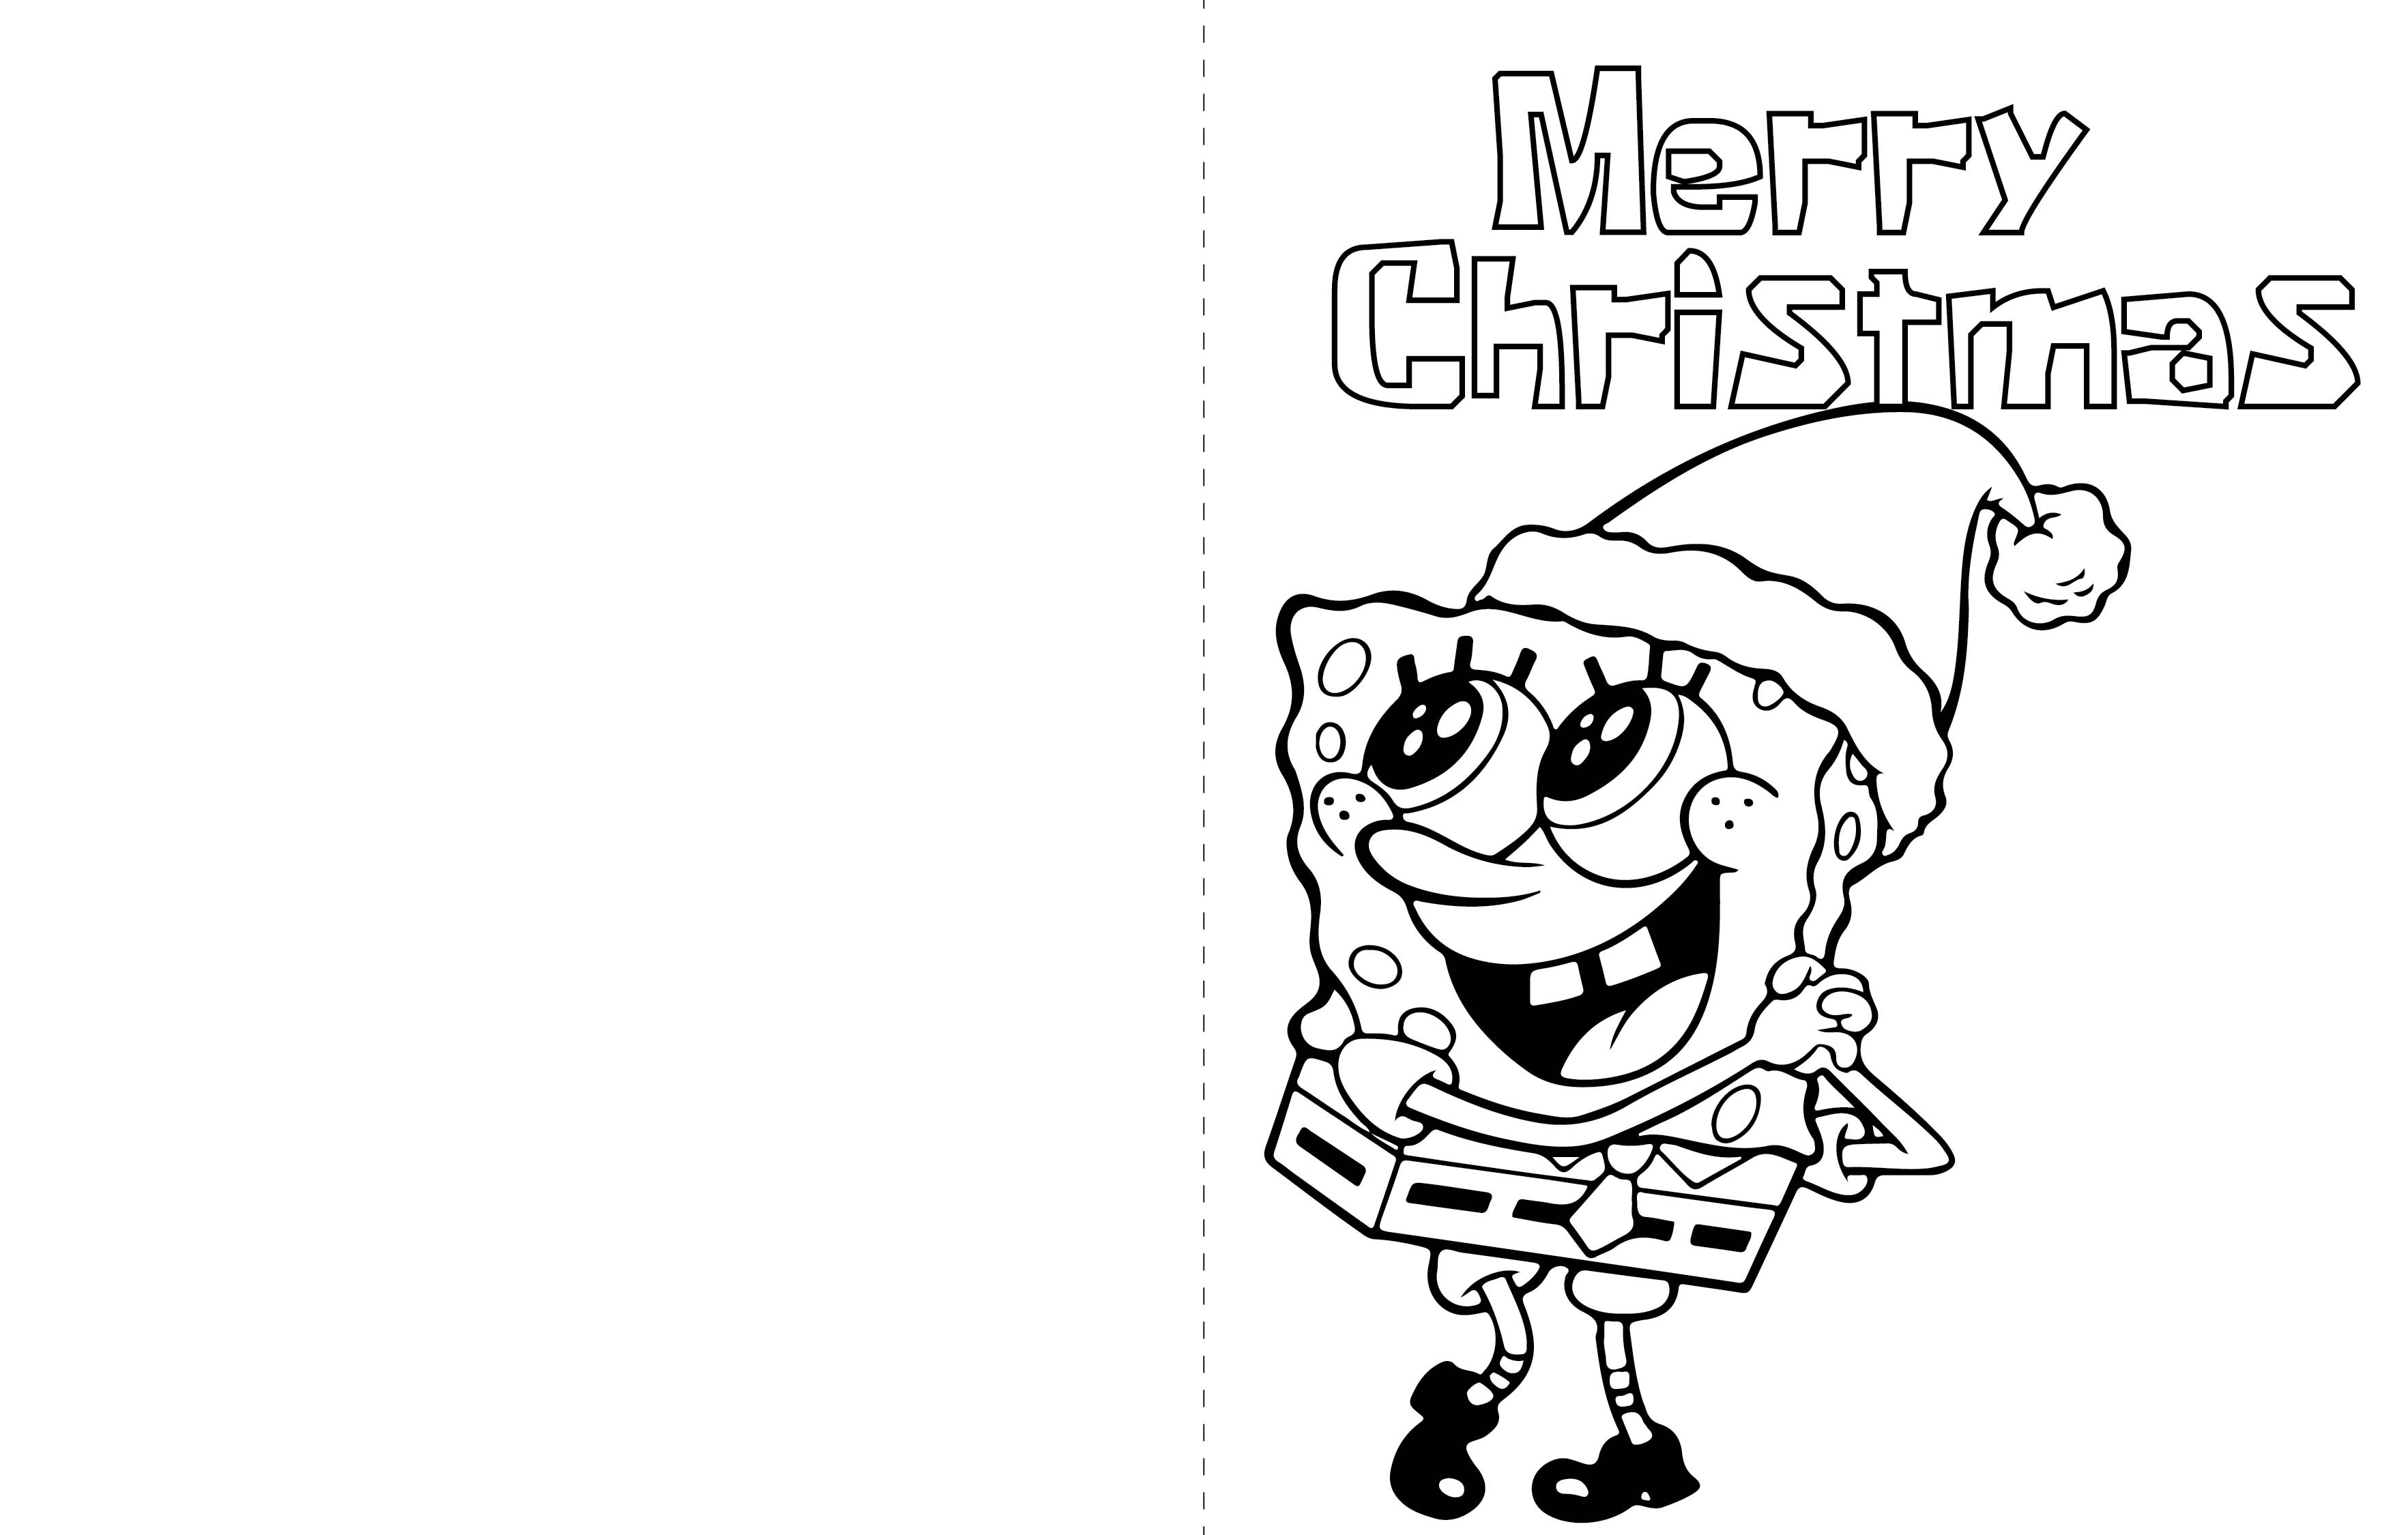 christmas-cards-colouring-pictures-10-best-free-printable-christmas